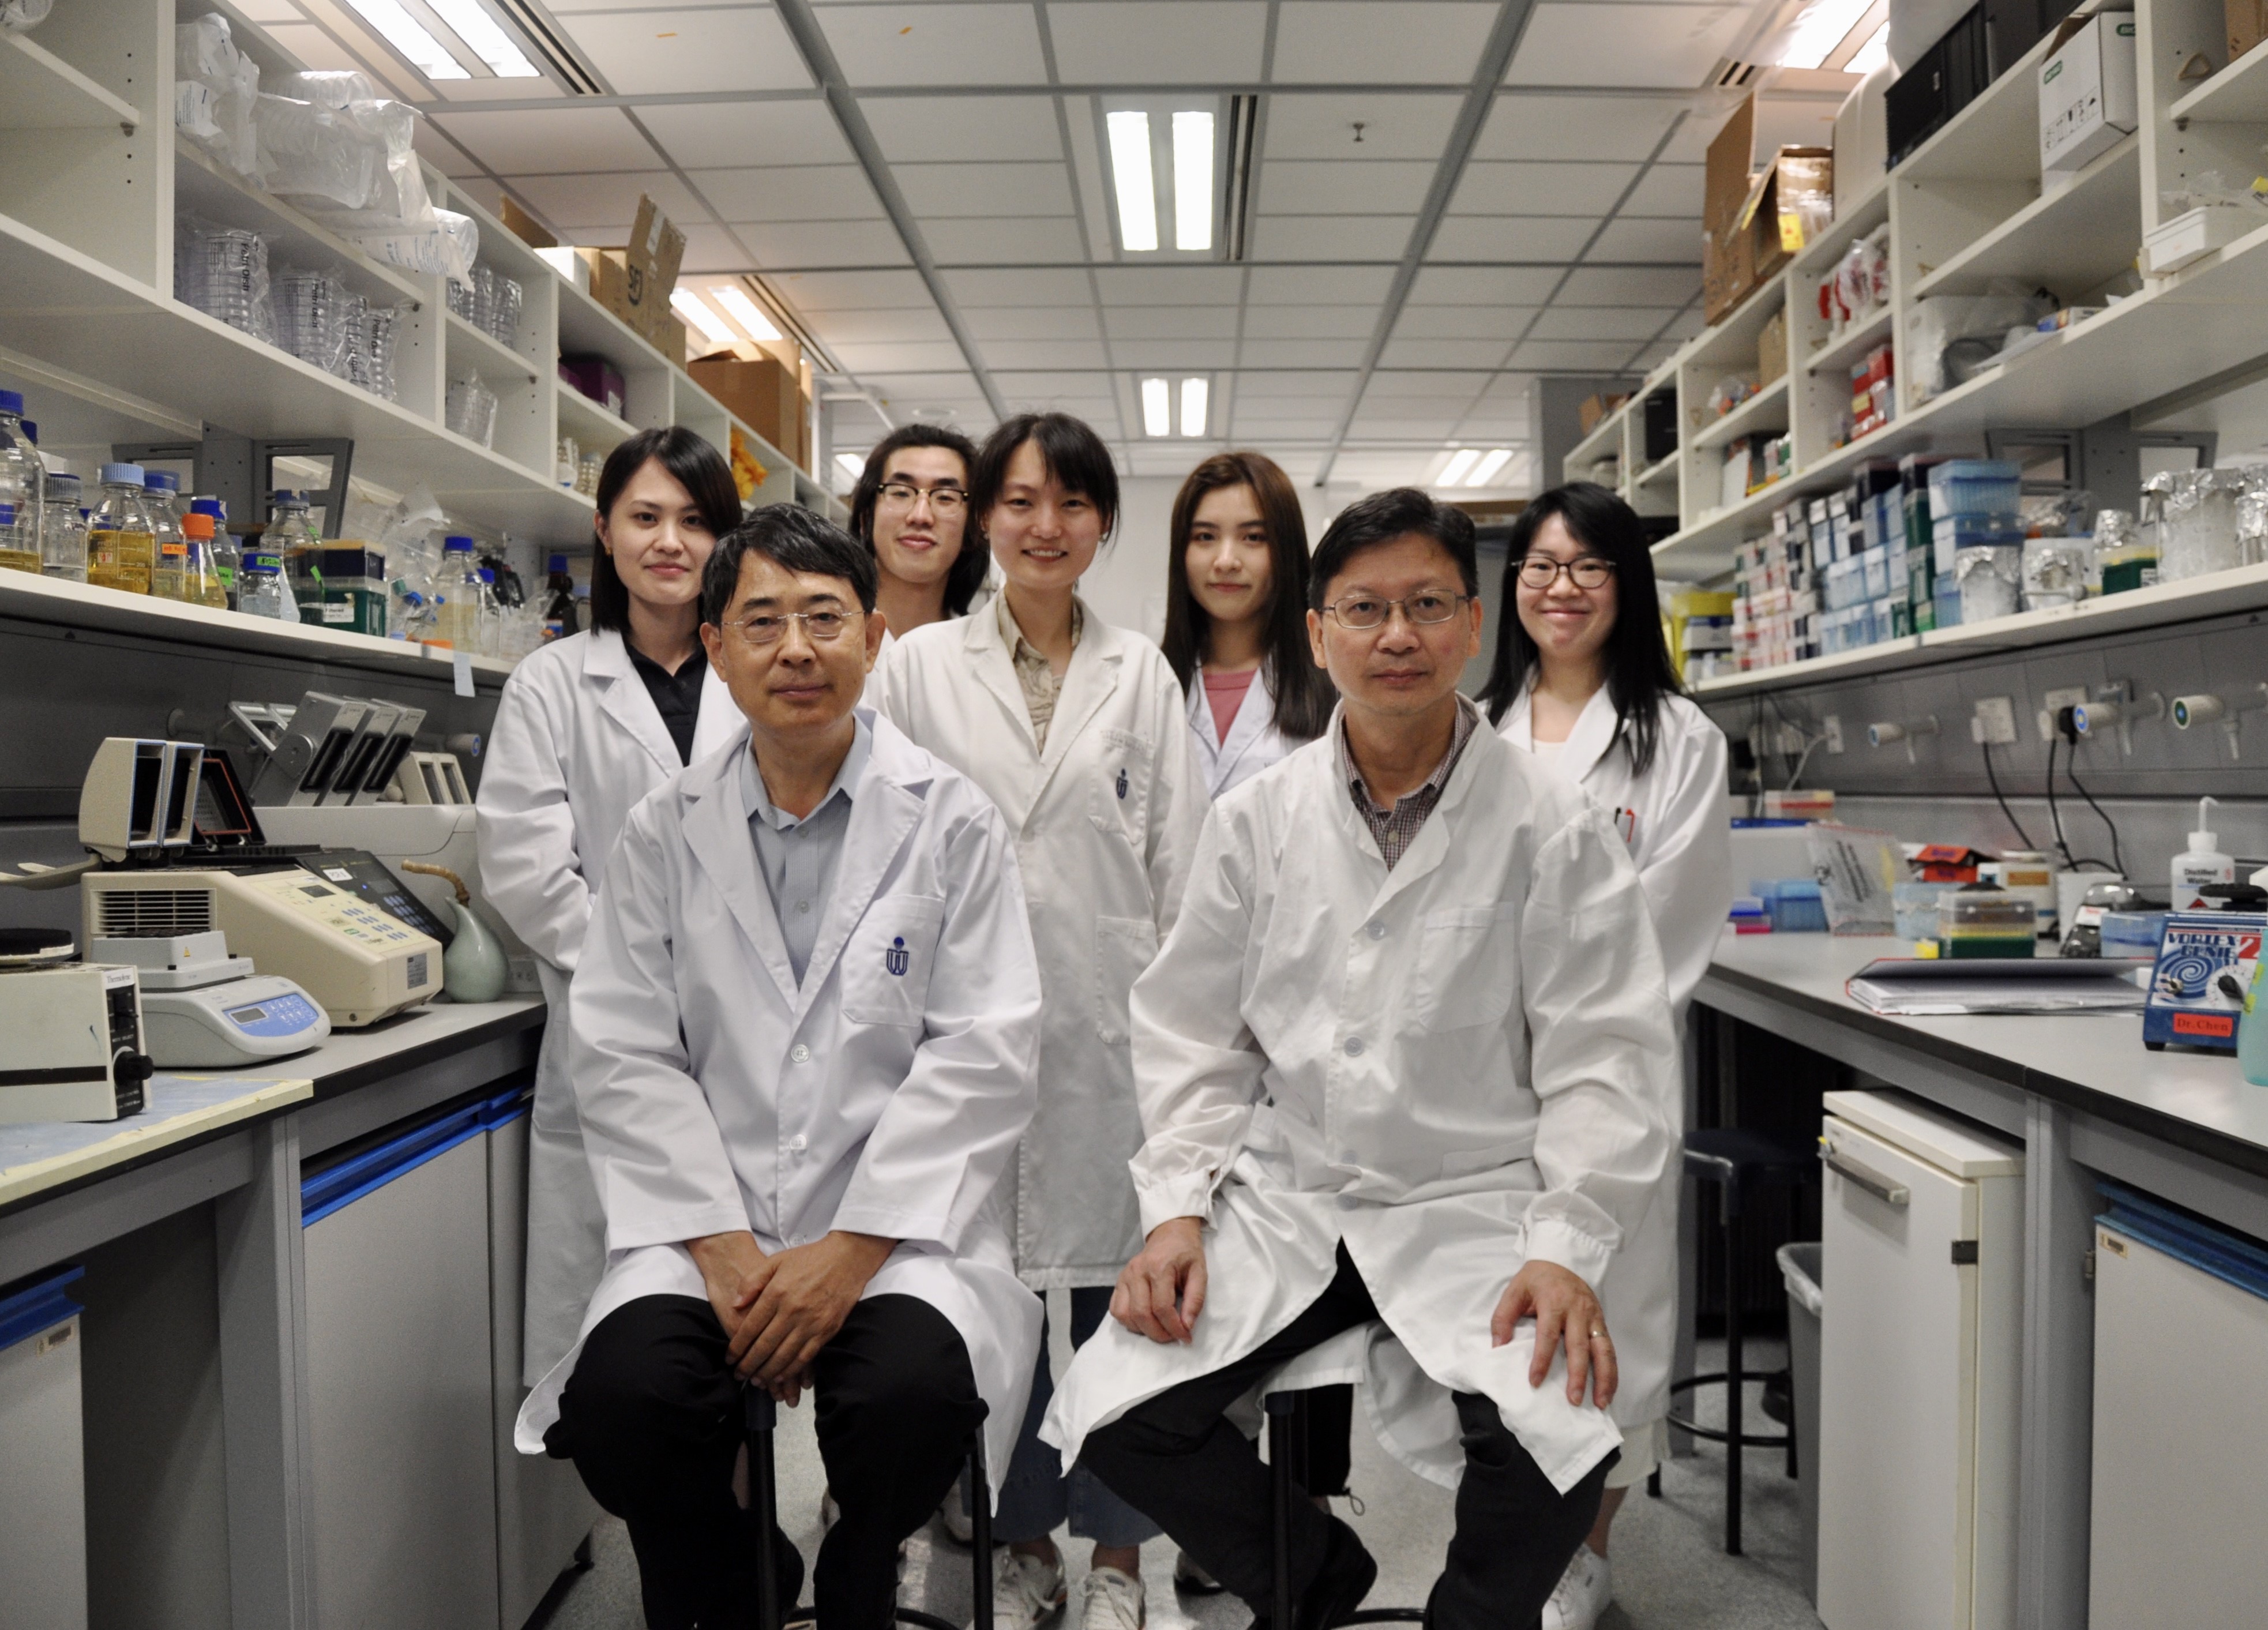 (Front Left) Prof. QIAN Peiyuan, Head and Chair Professor of HKUST’s Department of Ocean Science, (Front Right) Prof. QIU Jianwen, Professor of Hong Kong Baptist University’s Department of Biology and their research team.